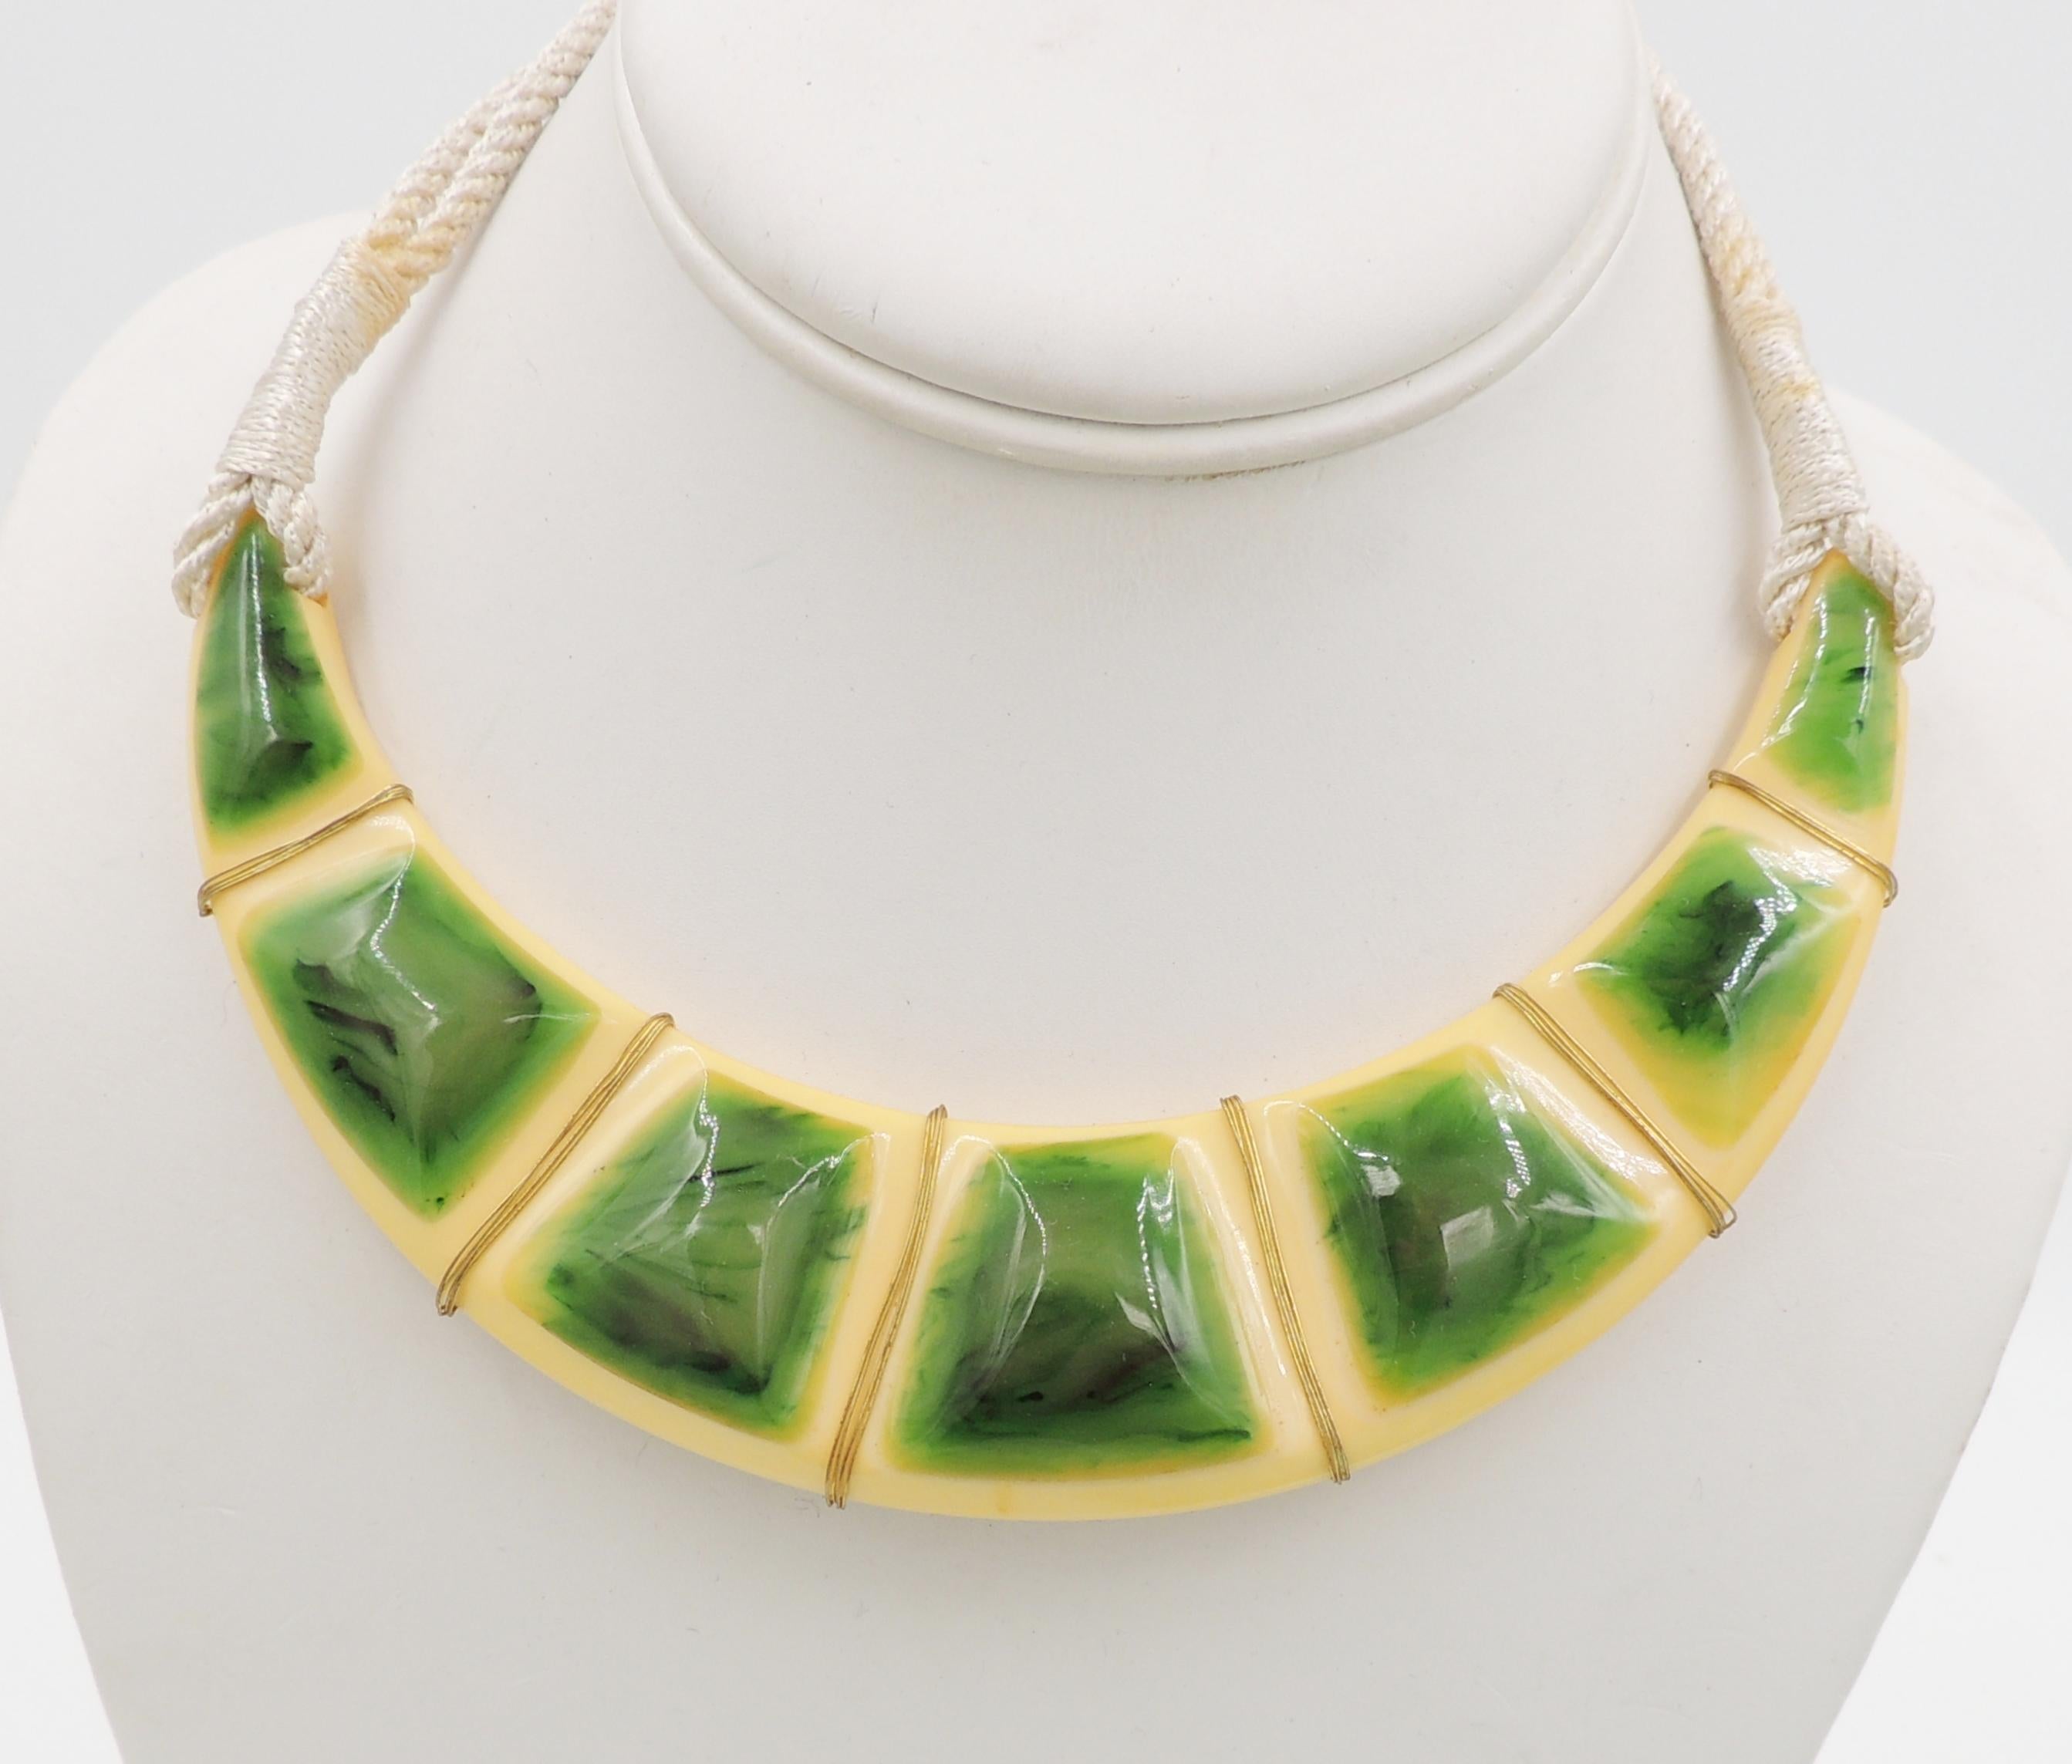 Vintage 1970s Signed Valentino Wrapped Green & Ivory Lucite Collar Necklace For Sale 2